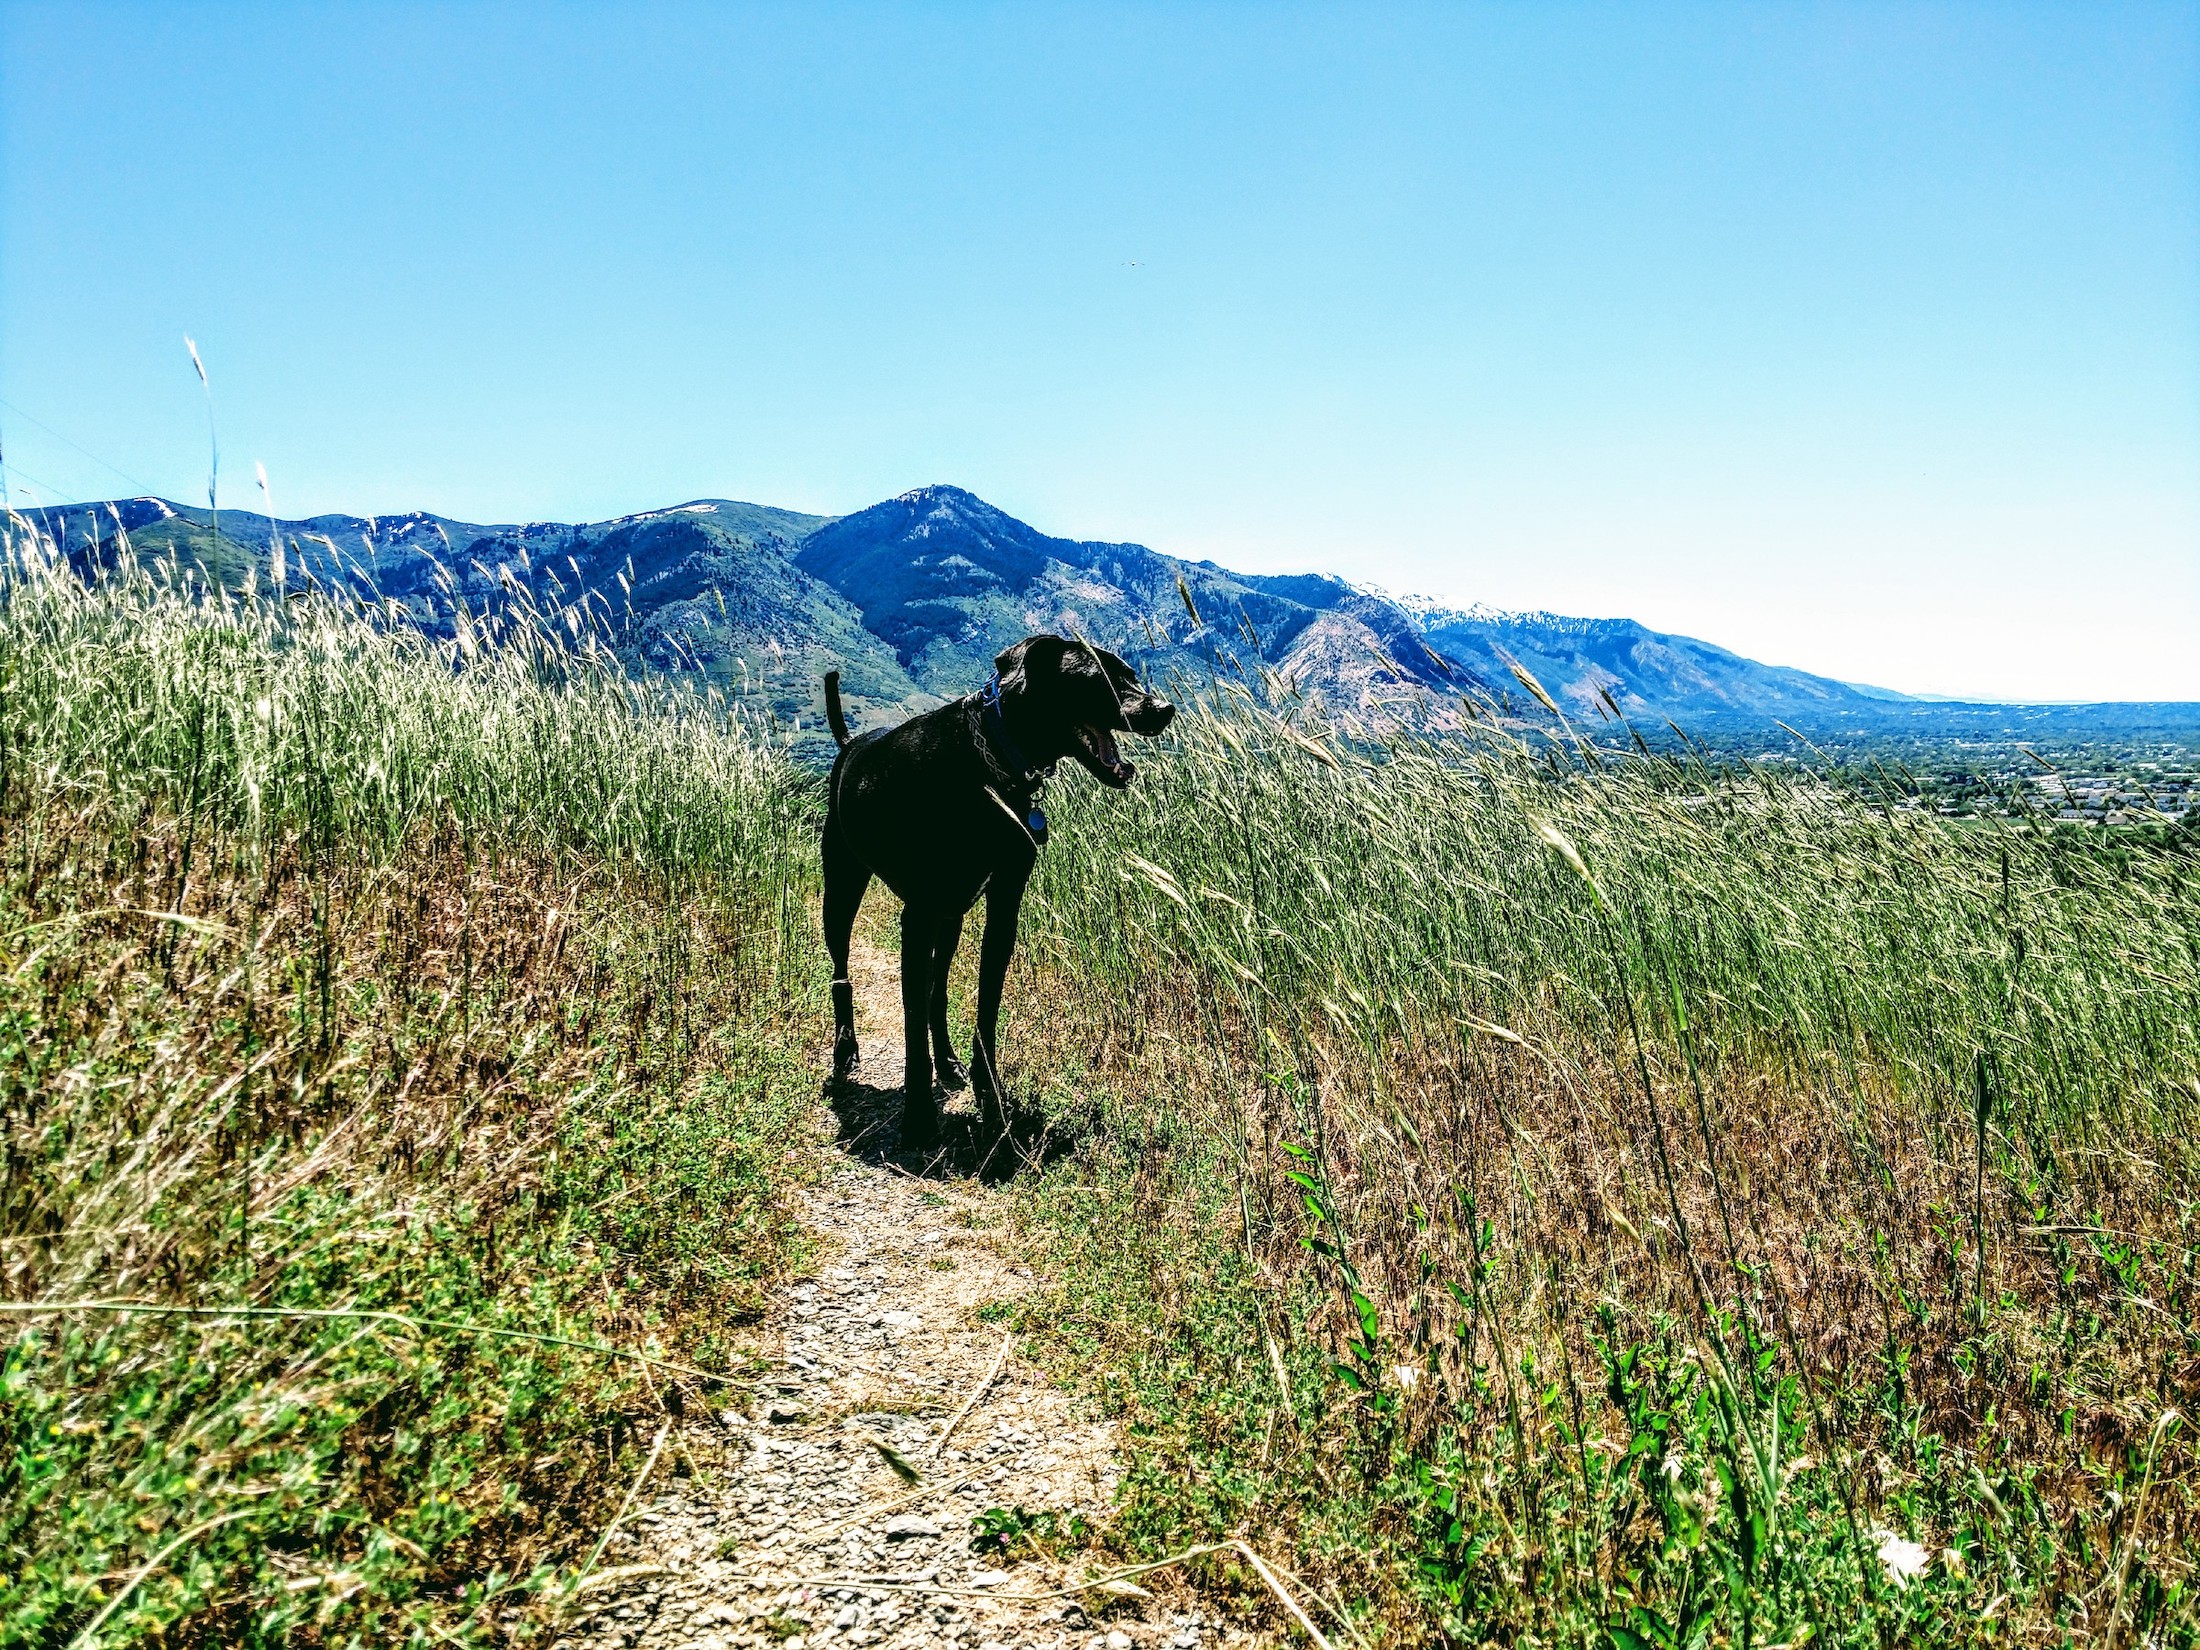 a black lab/pit/Dane mix stands in a field of tall green grass in the hills, beneath a blue sky